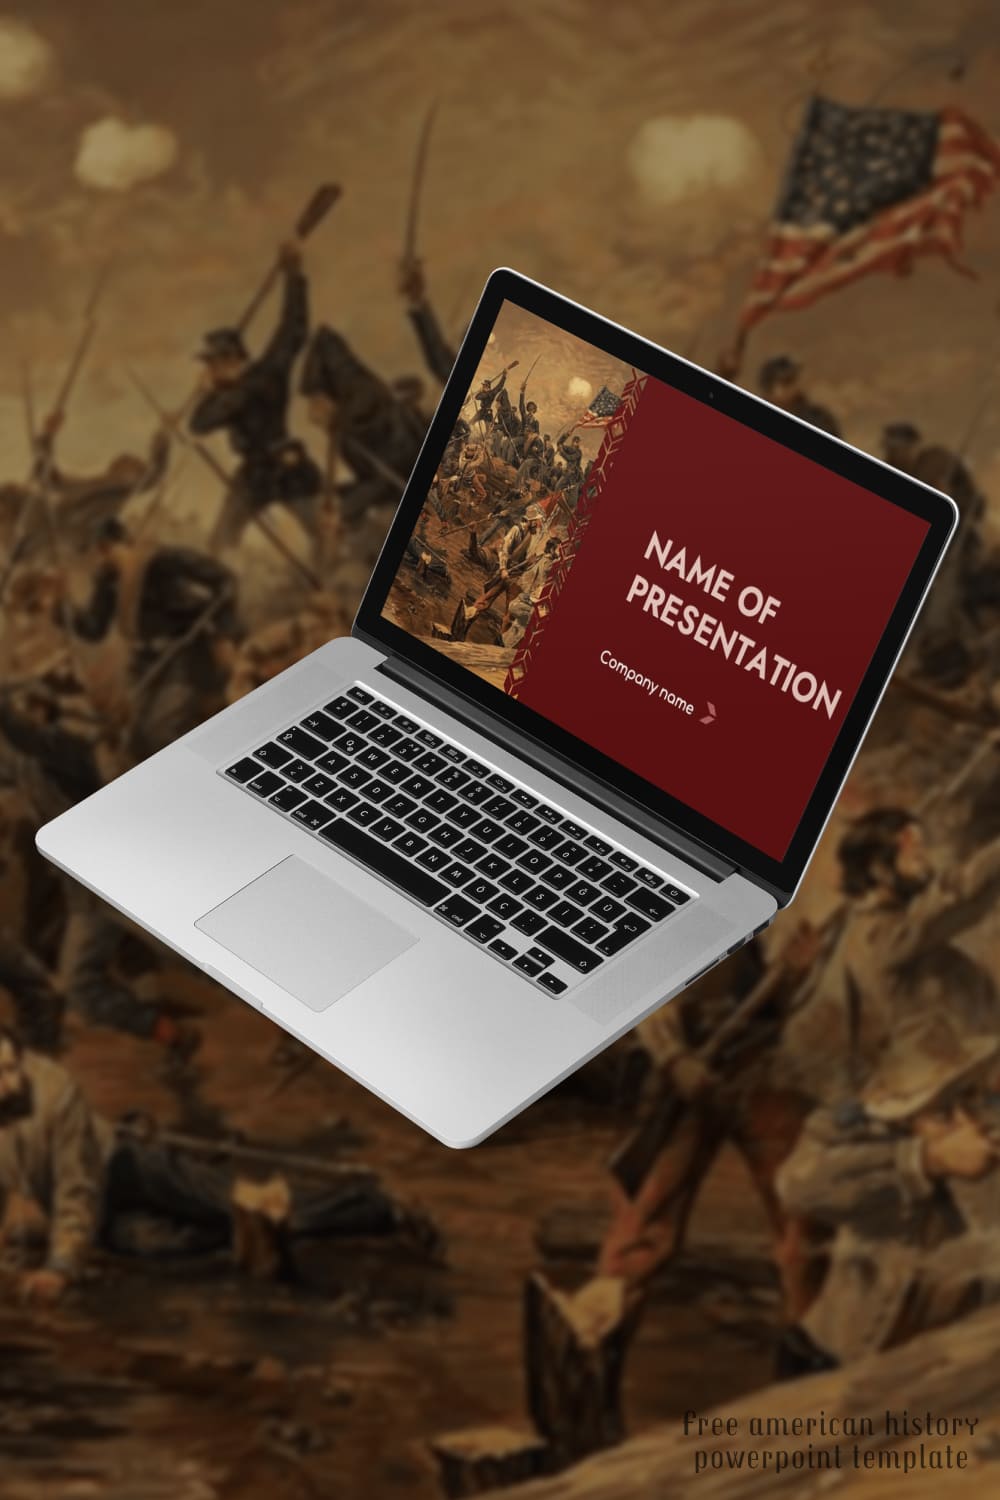 Free American History Powerpoint Template Pinterest.